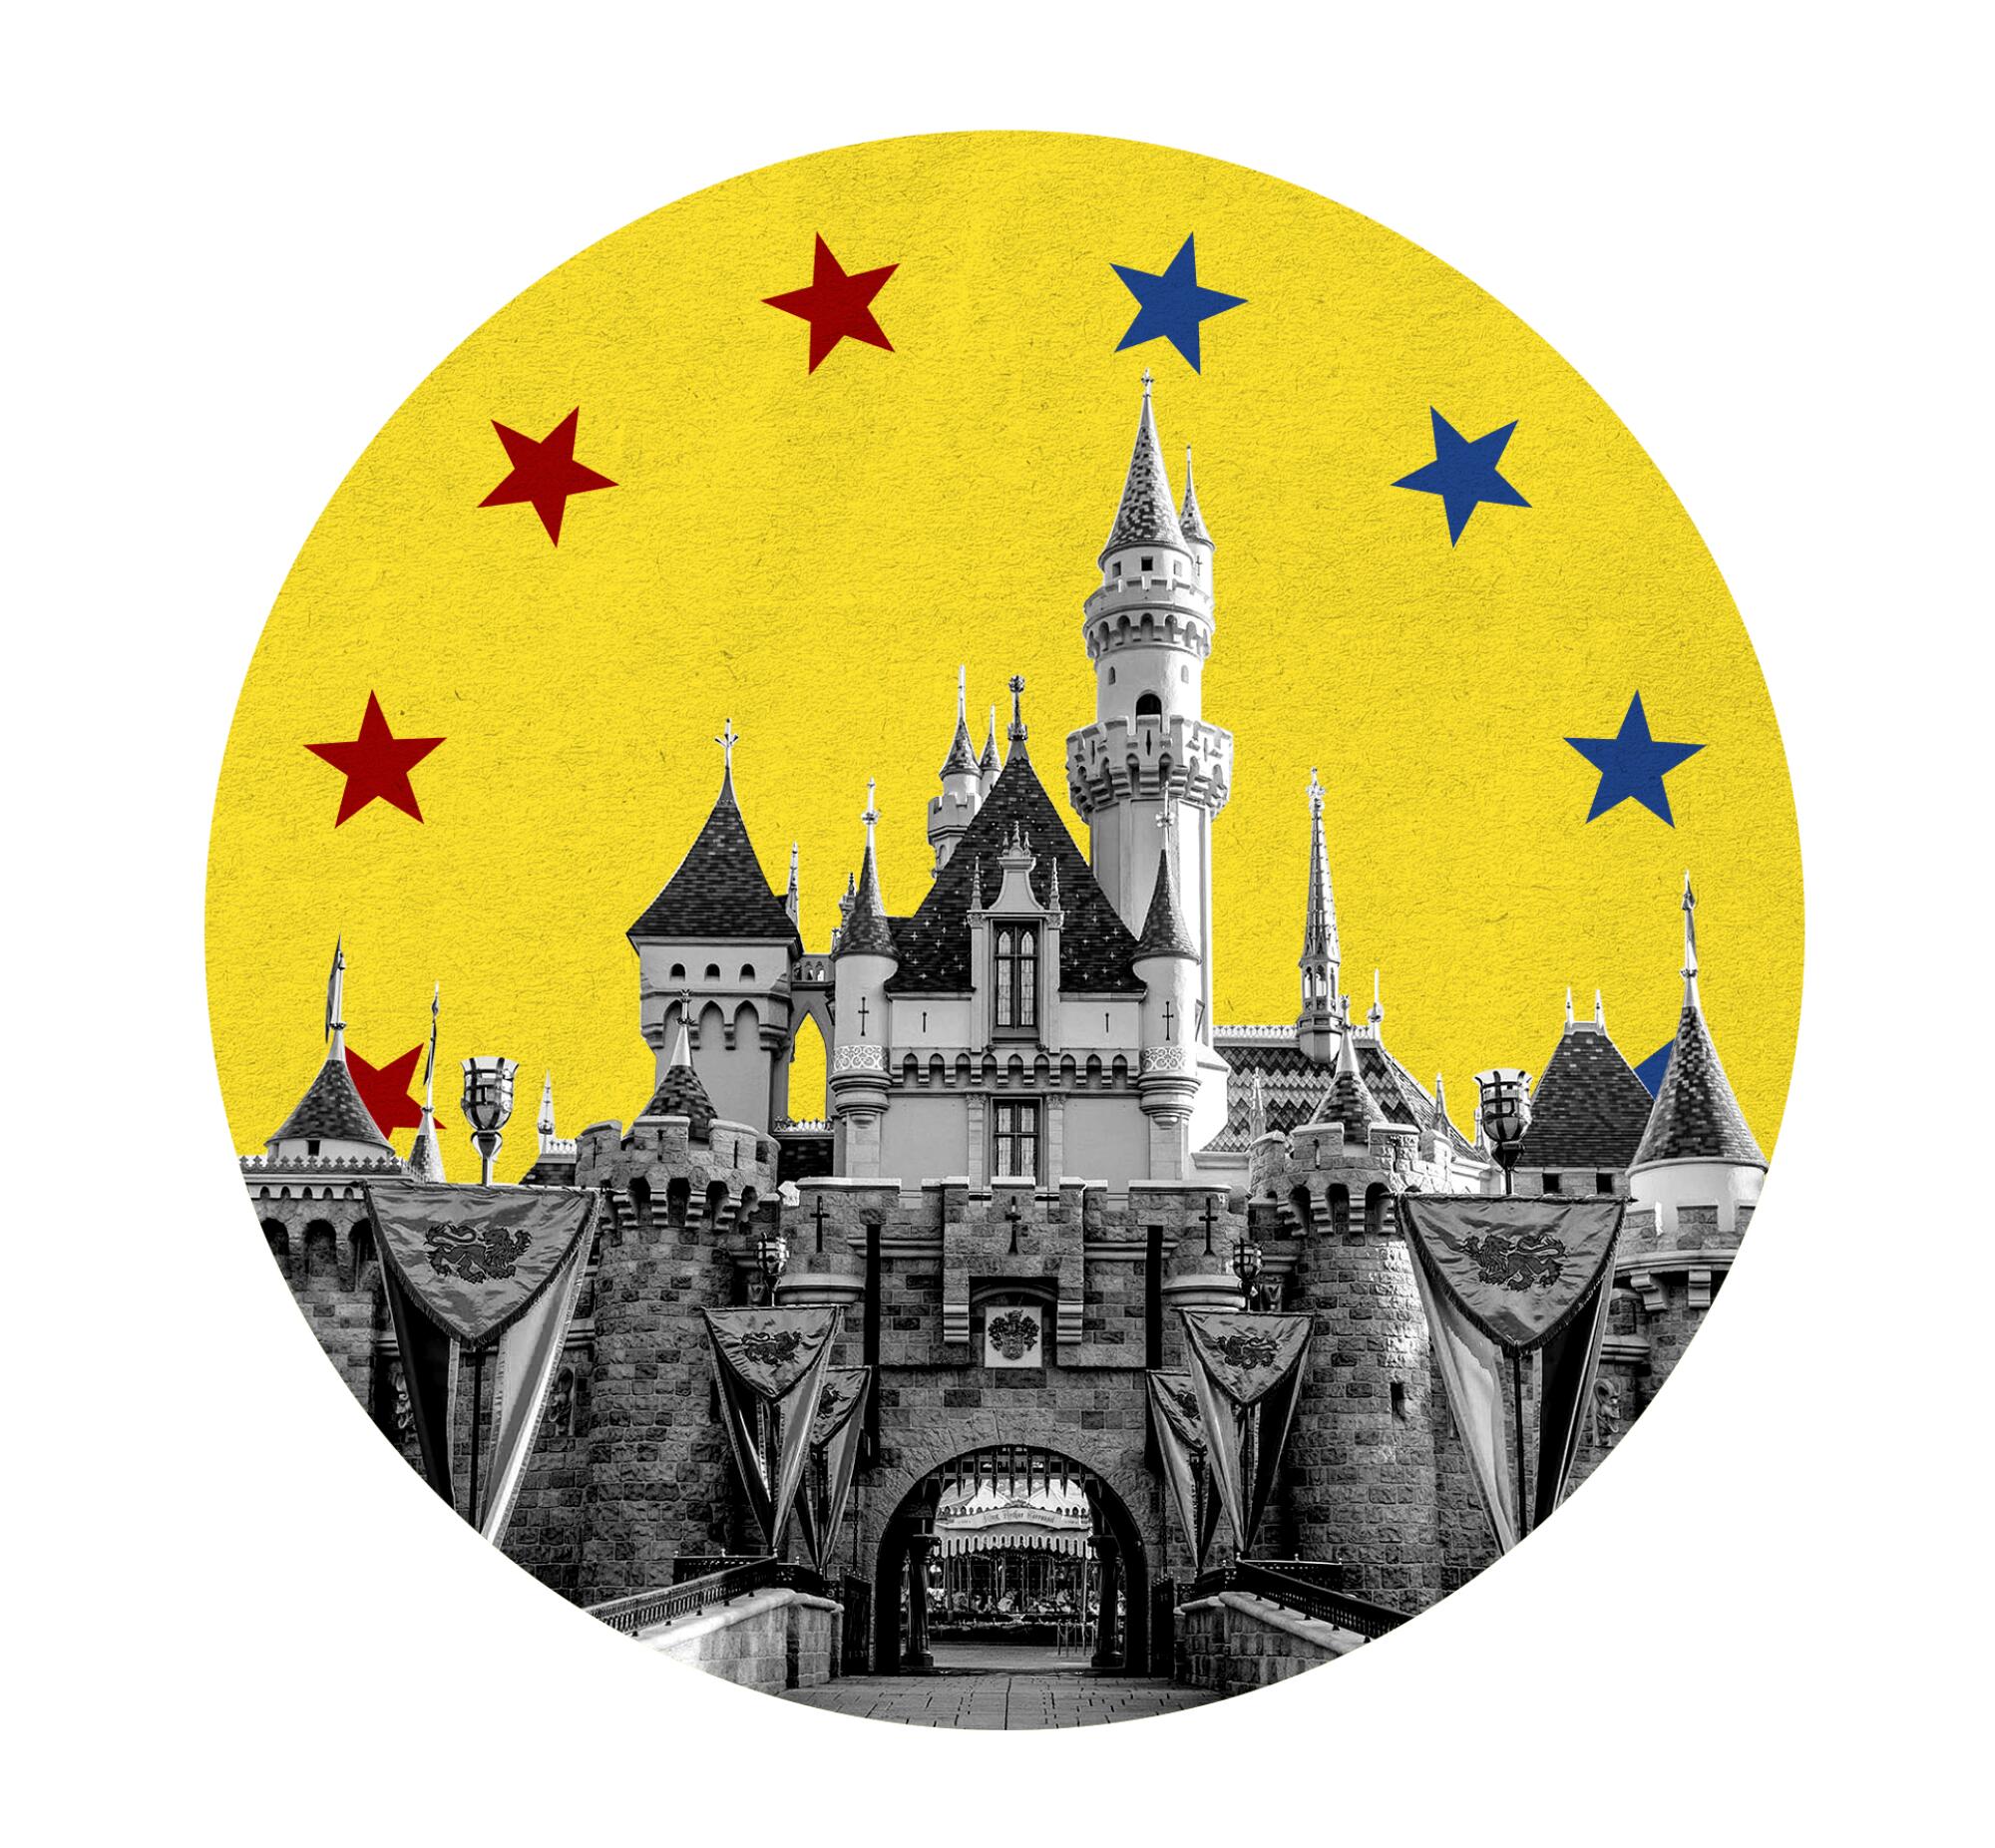 Photo of Disney castle in yellow circle with stars